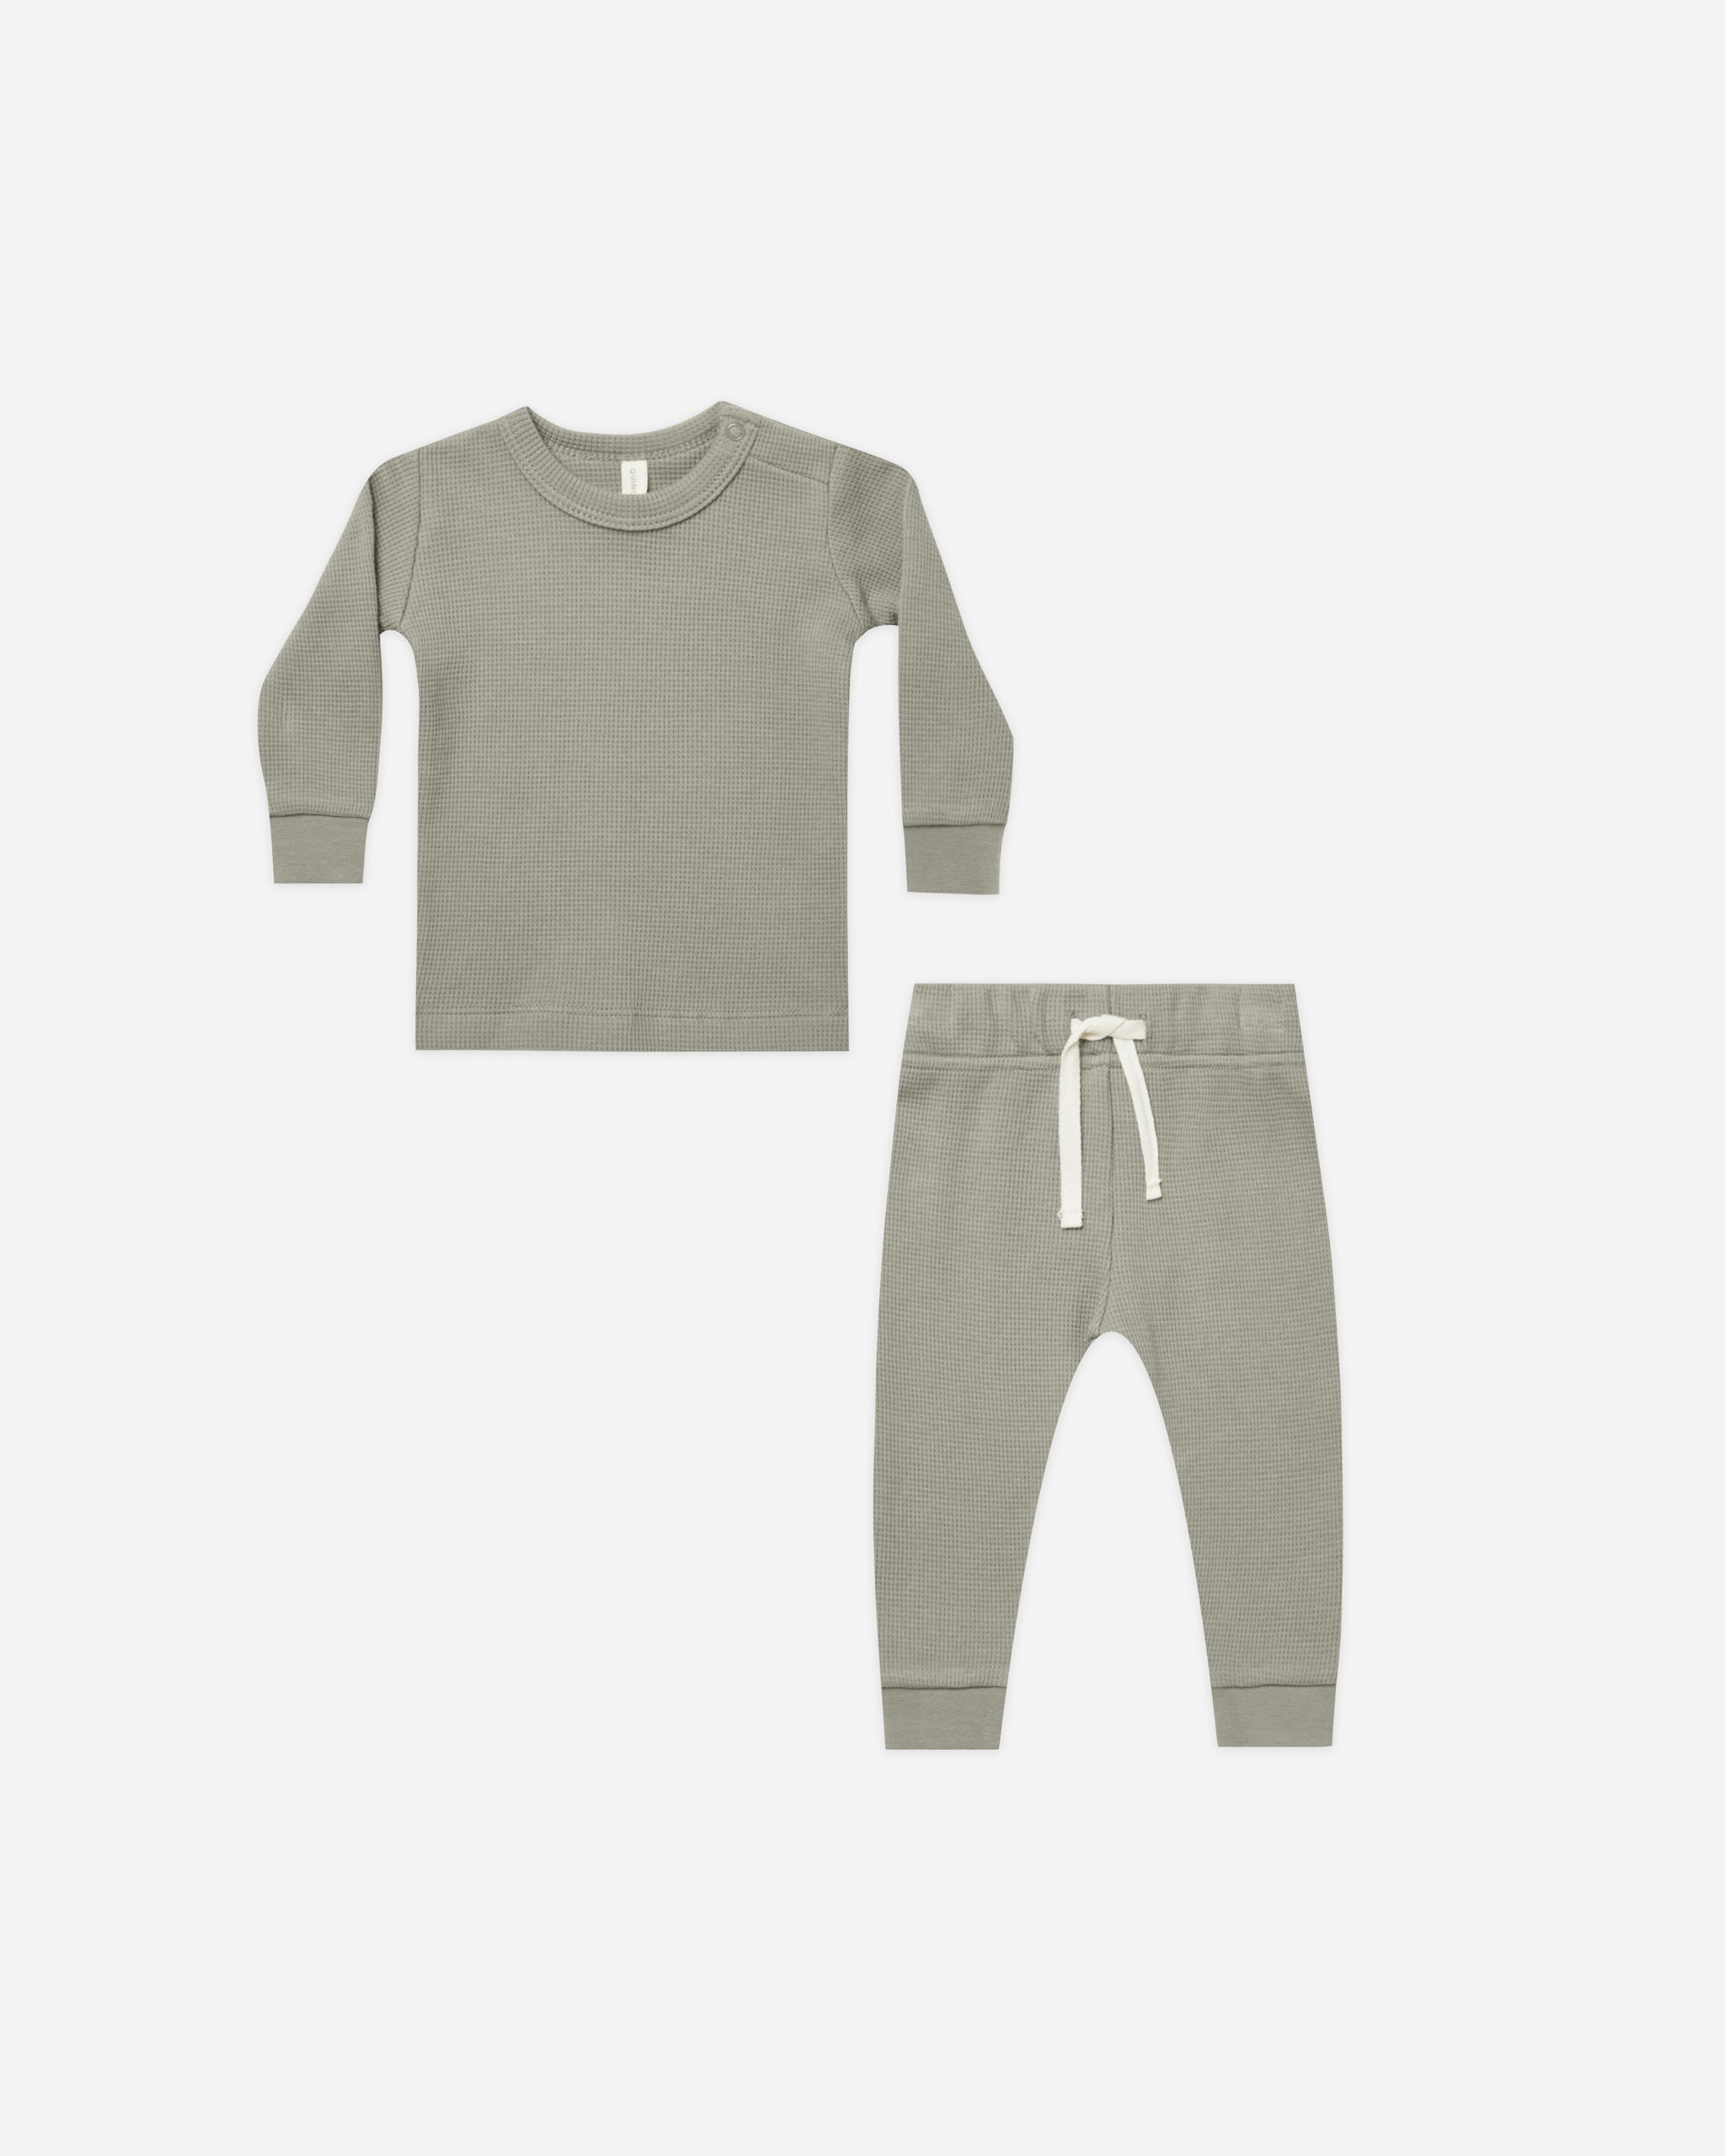 Waffle Top + Pant Set || Basil - Rylee + Cru | Kids Clothes | Trendy Baby Clothes | Modern Infant Outfits |